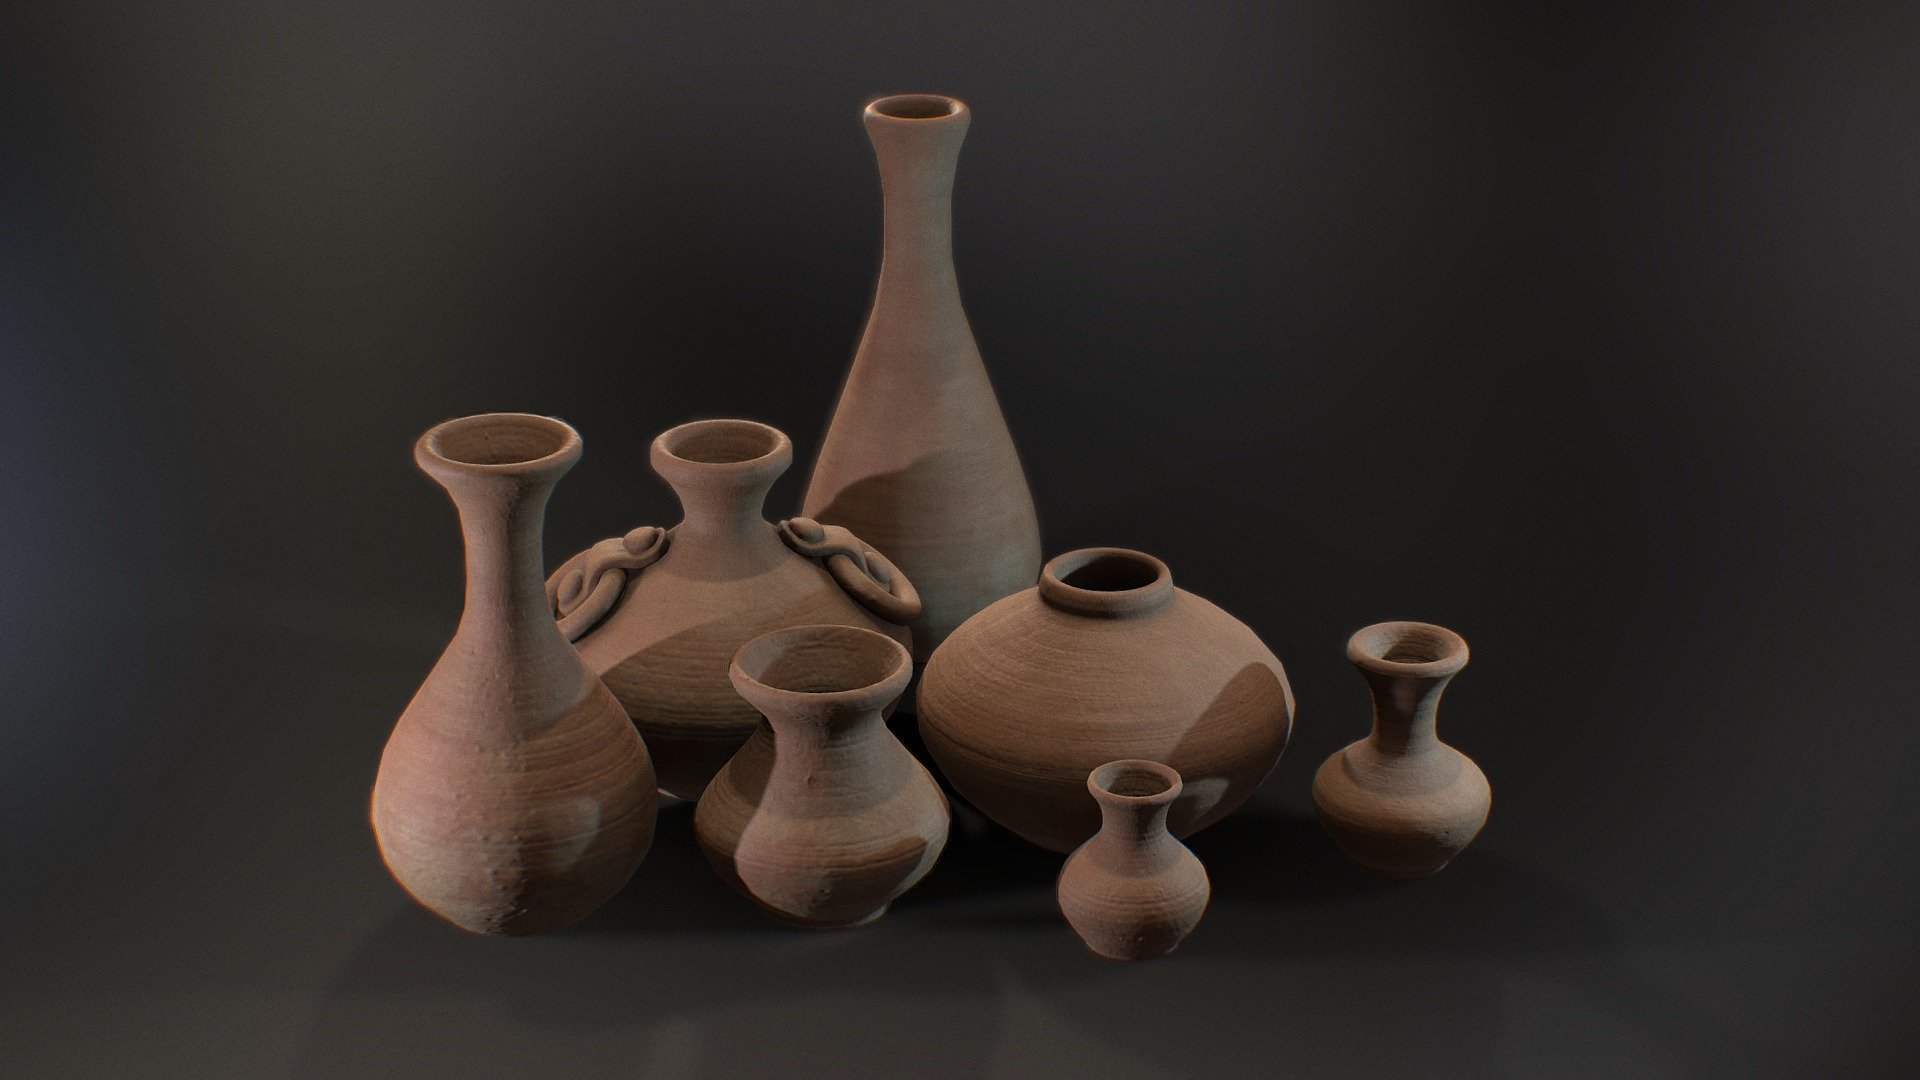 This are 3d models of clay Pot for using as water vessel. It is can be used as kitchenware assets for games and other store decoration renders.

This pack consists of 7 handmade models of claypots.

This model is created in 3ds Max and textured in Substance Painter.

This model is made in real proportions.

High quality of textures are available to download.

PBR Maps include - Base Color, Normal, AO and Roughness Textures 3d model